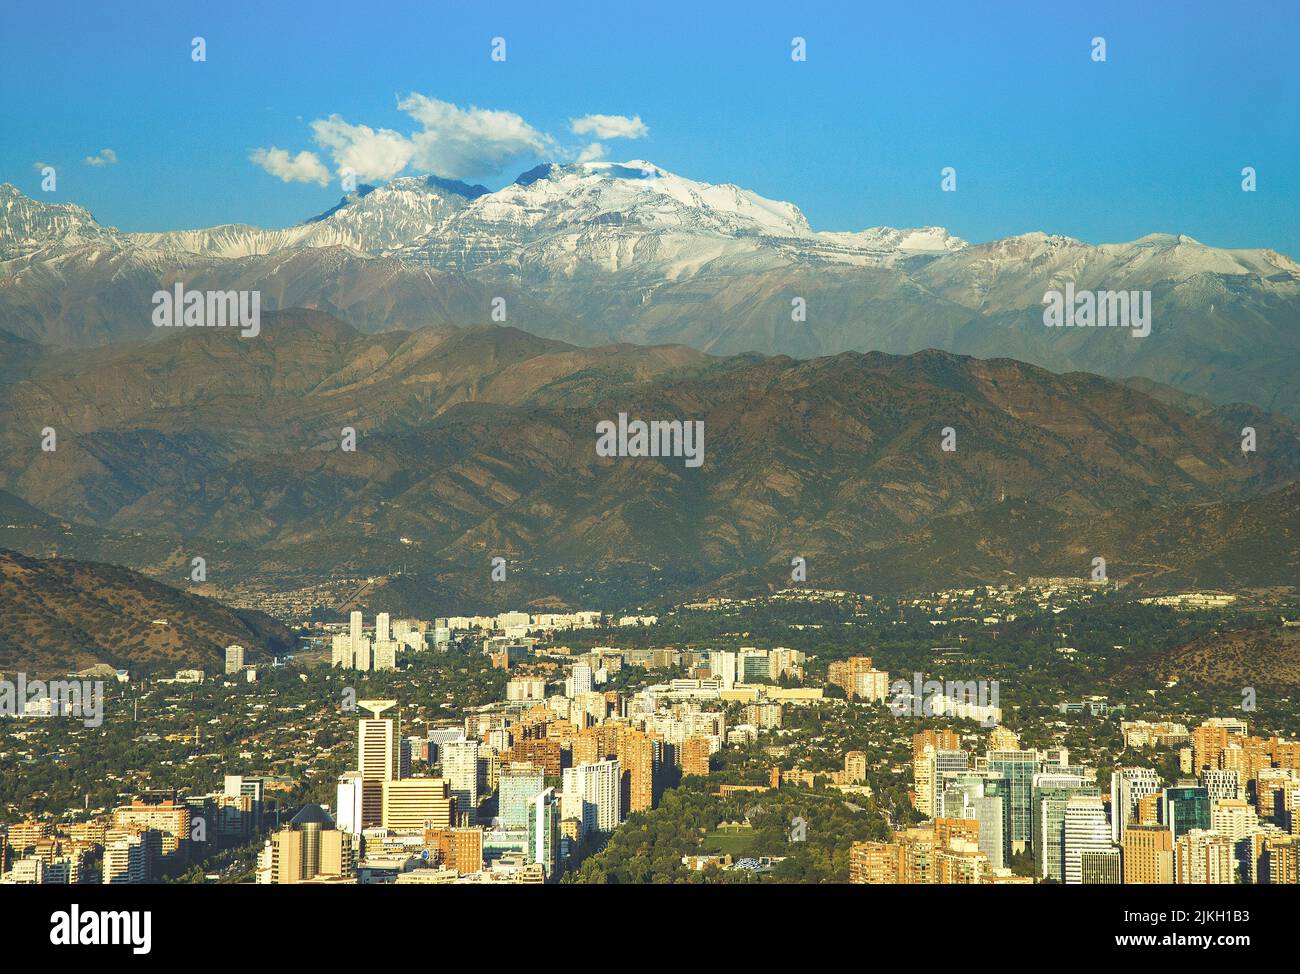 An aerial view of Andes mountain range in Santiago, Chile Stock Photo